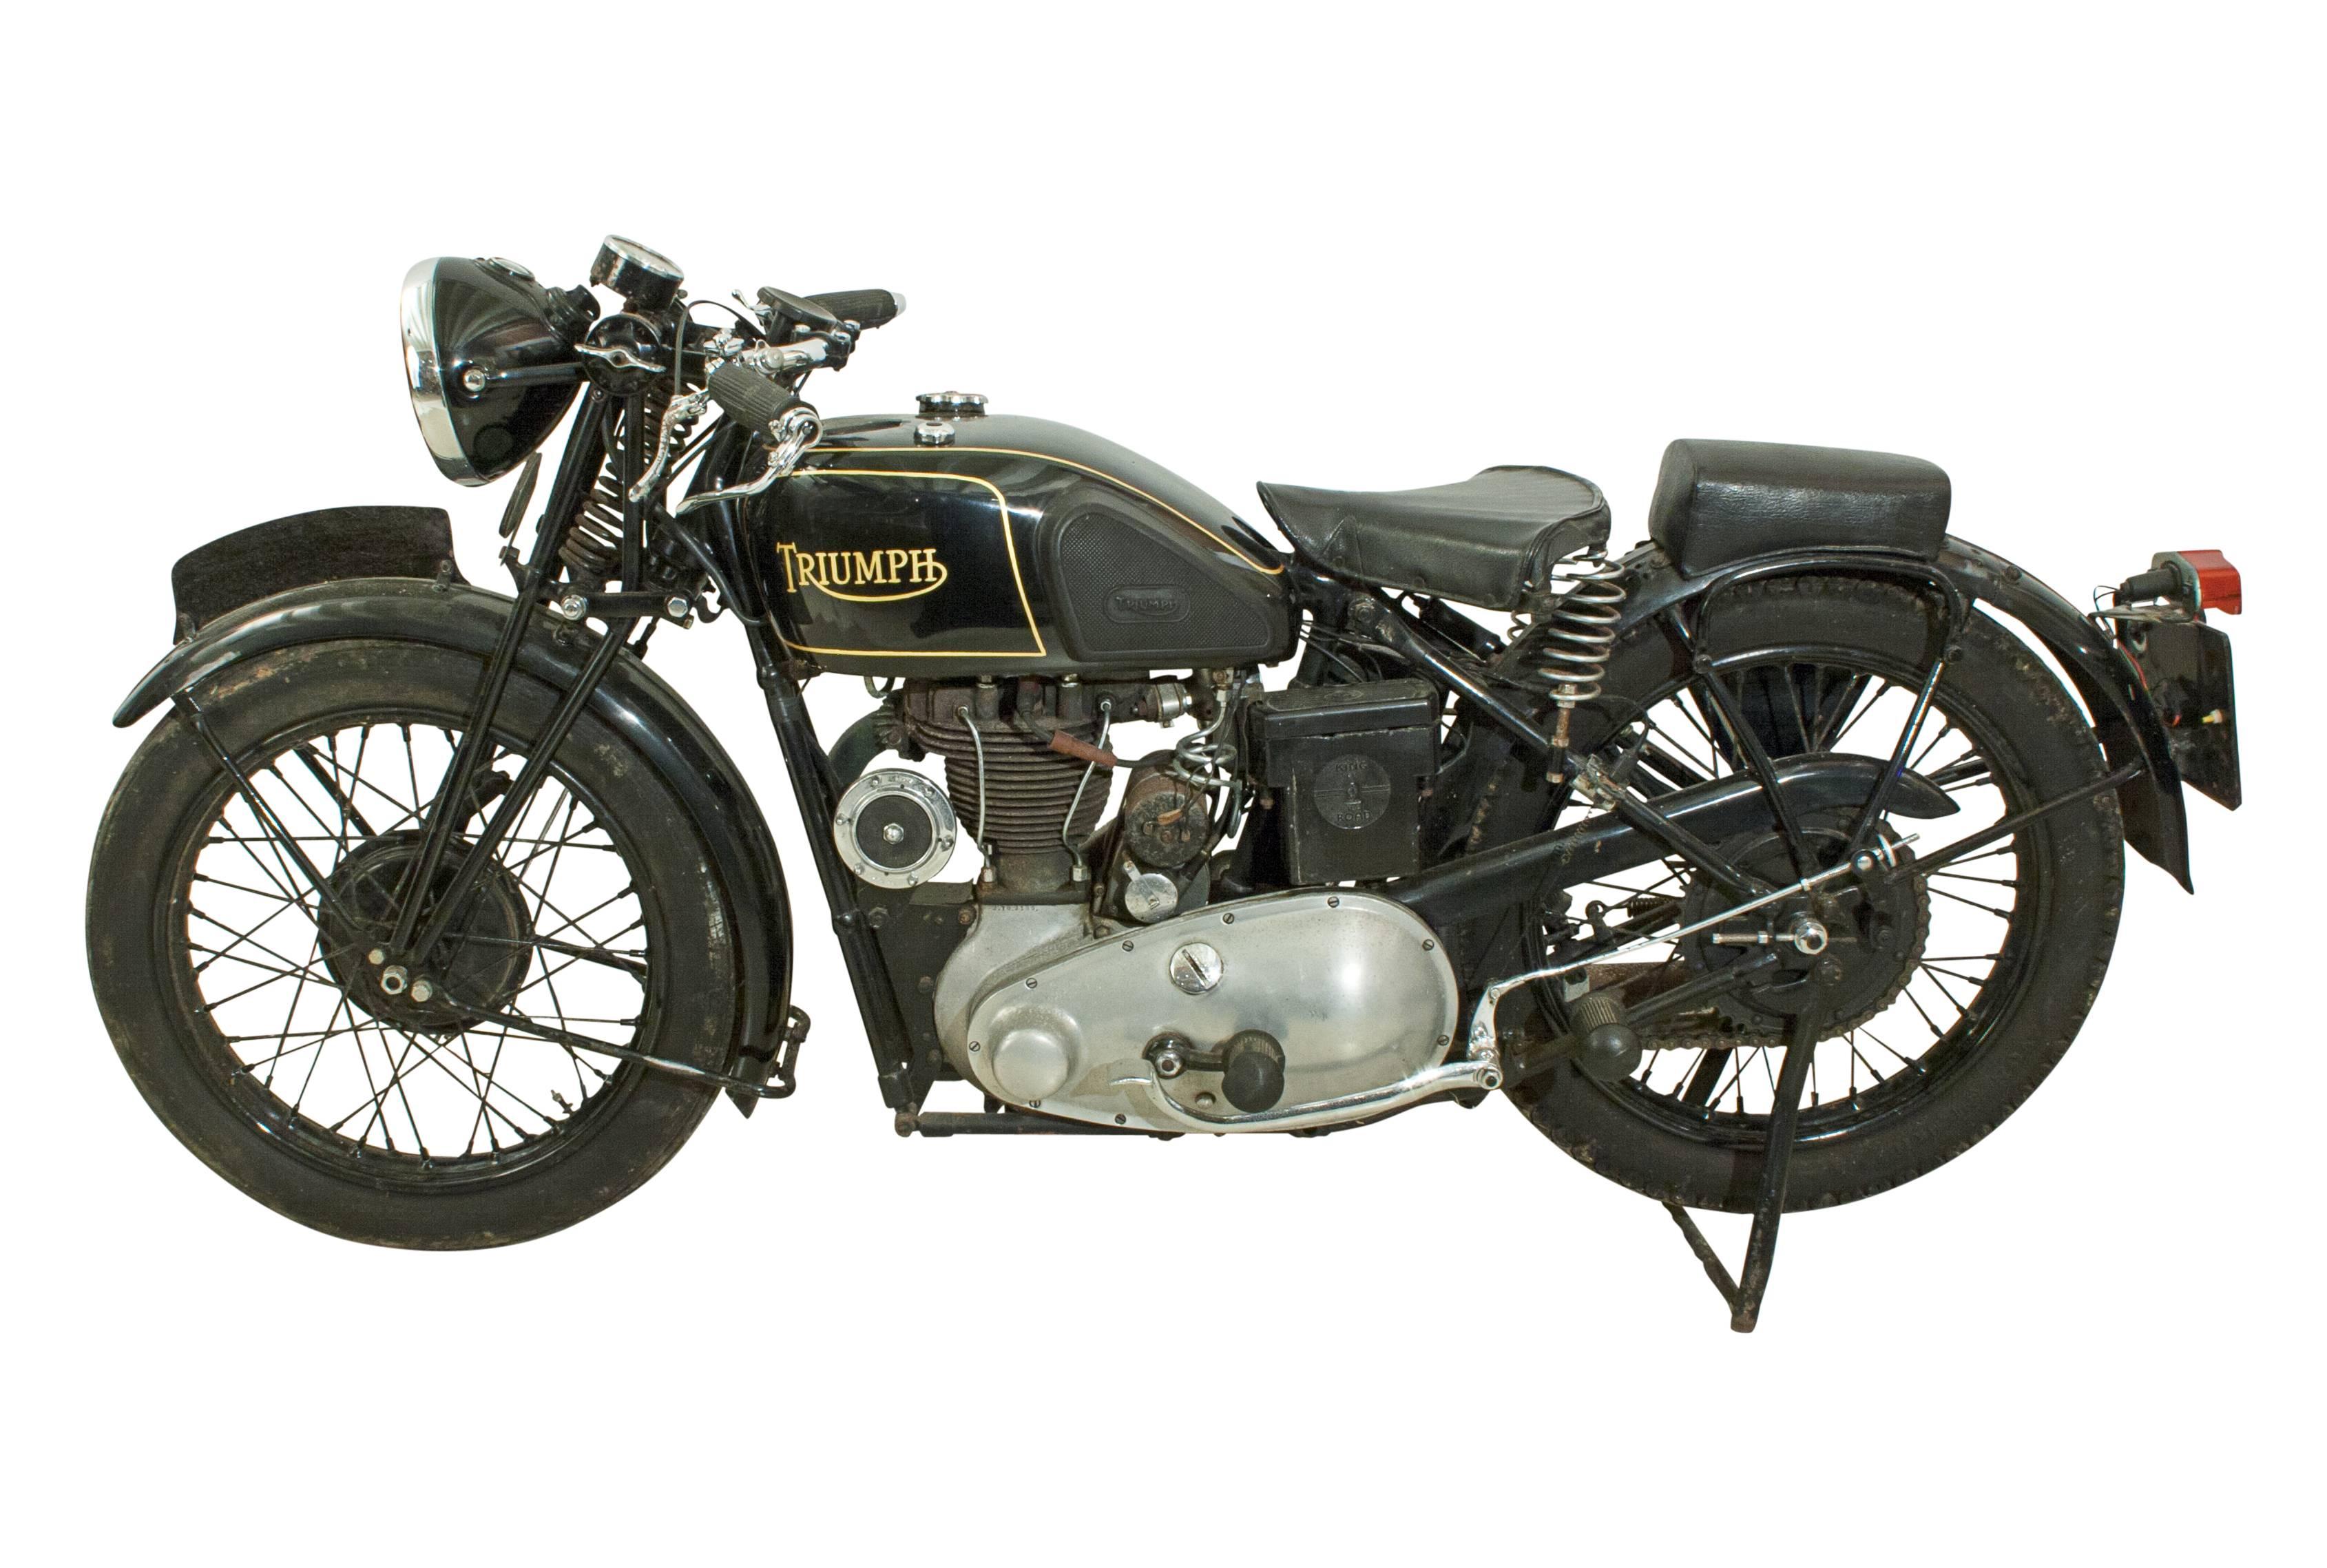 1936 Triumph Motorcycle Val Page Design.
An original 350cc Triumph Motorcycle, model 3/2, first registered in 1936. This Triumph bike is in very good condition with original matching engine and frame numbers Tax and MOT exempt, black colour,